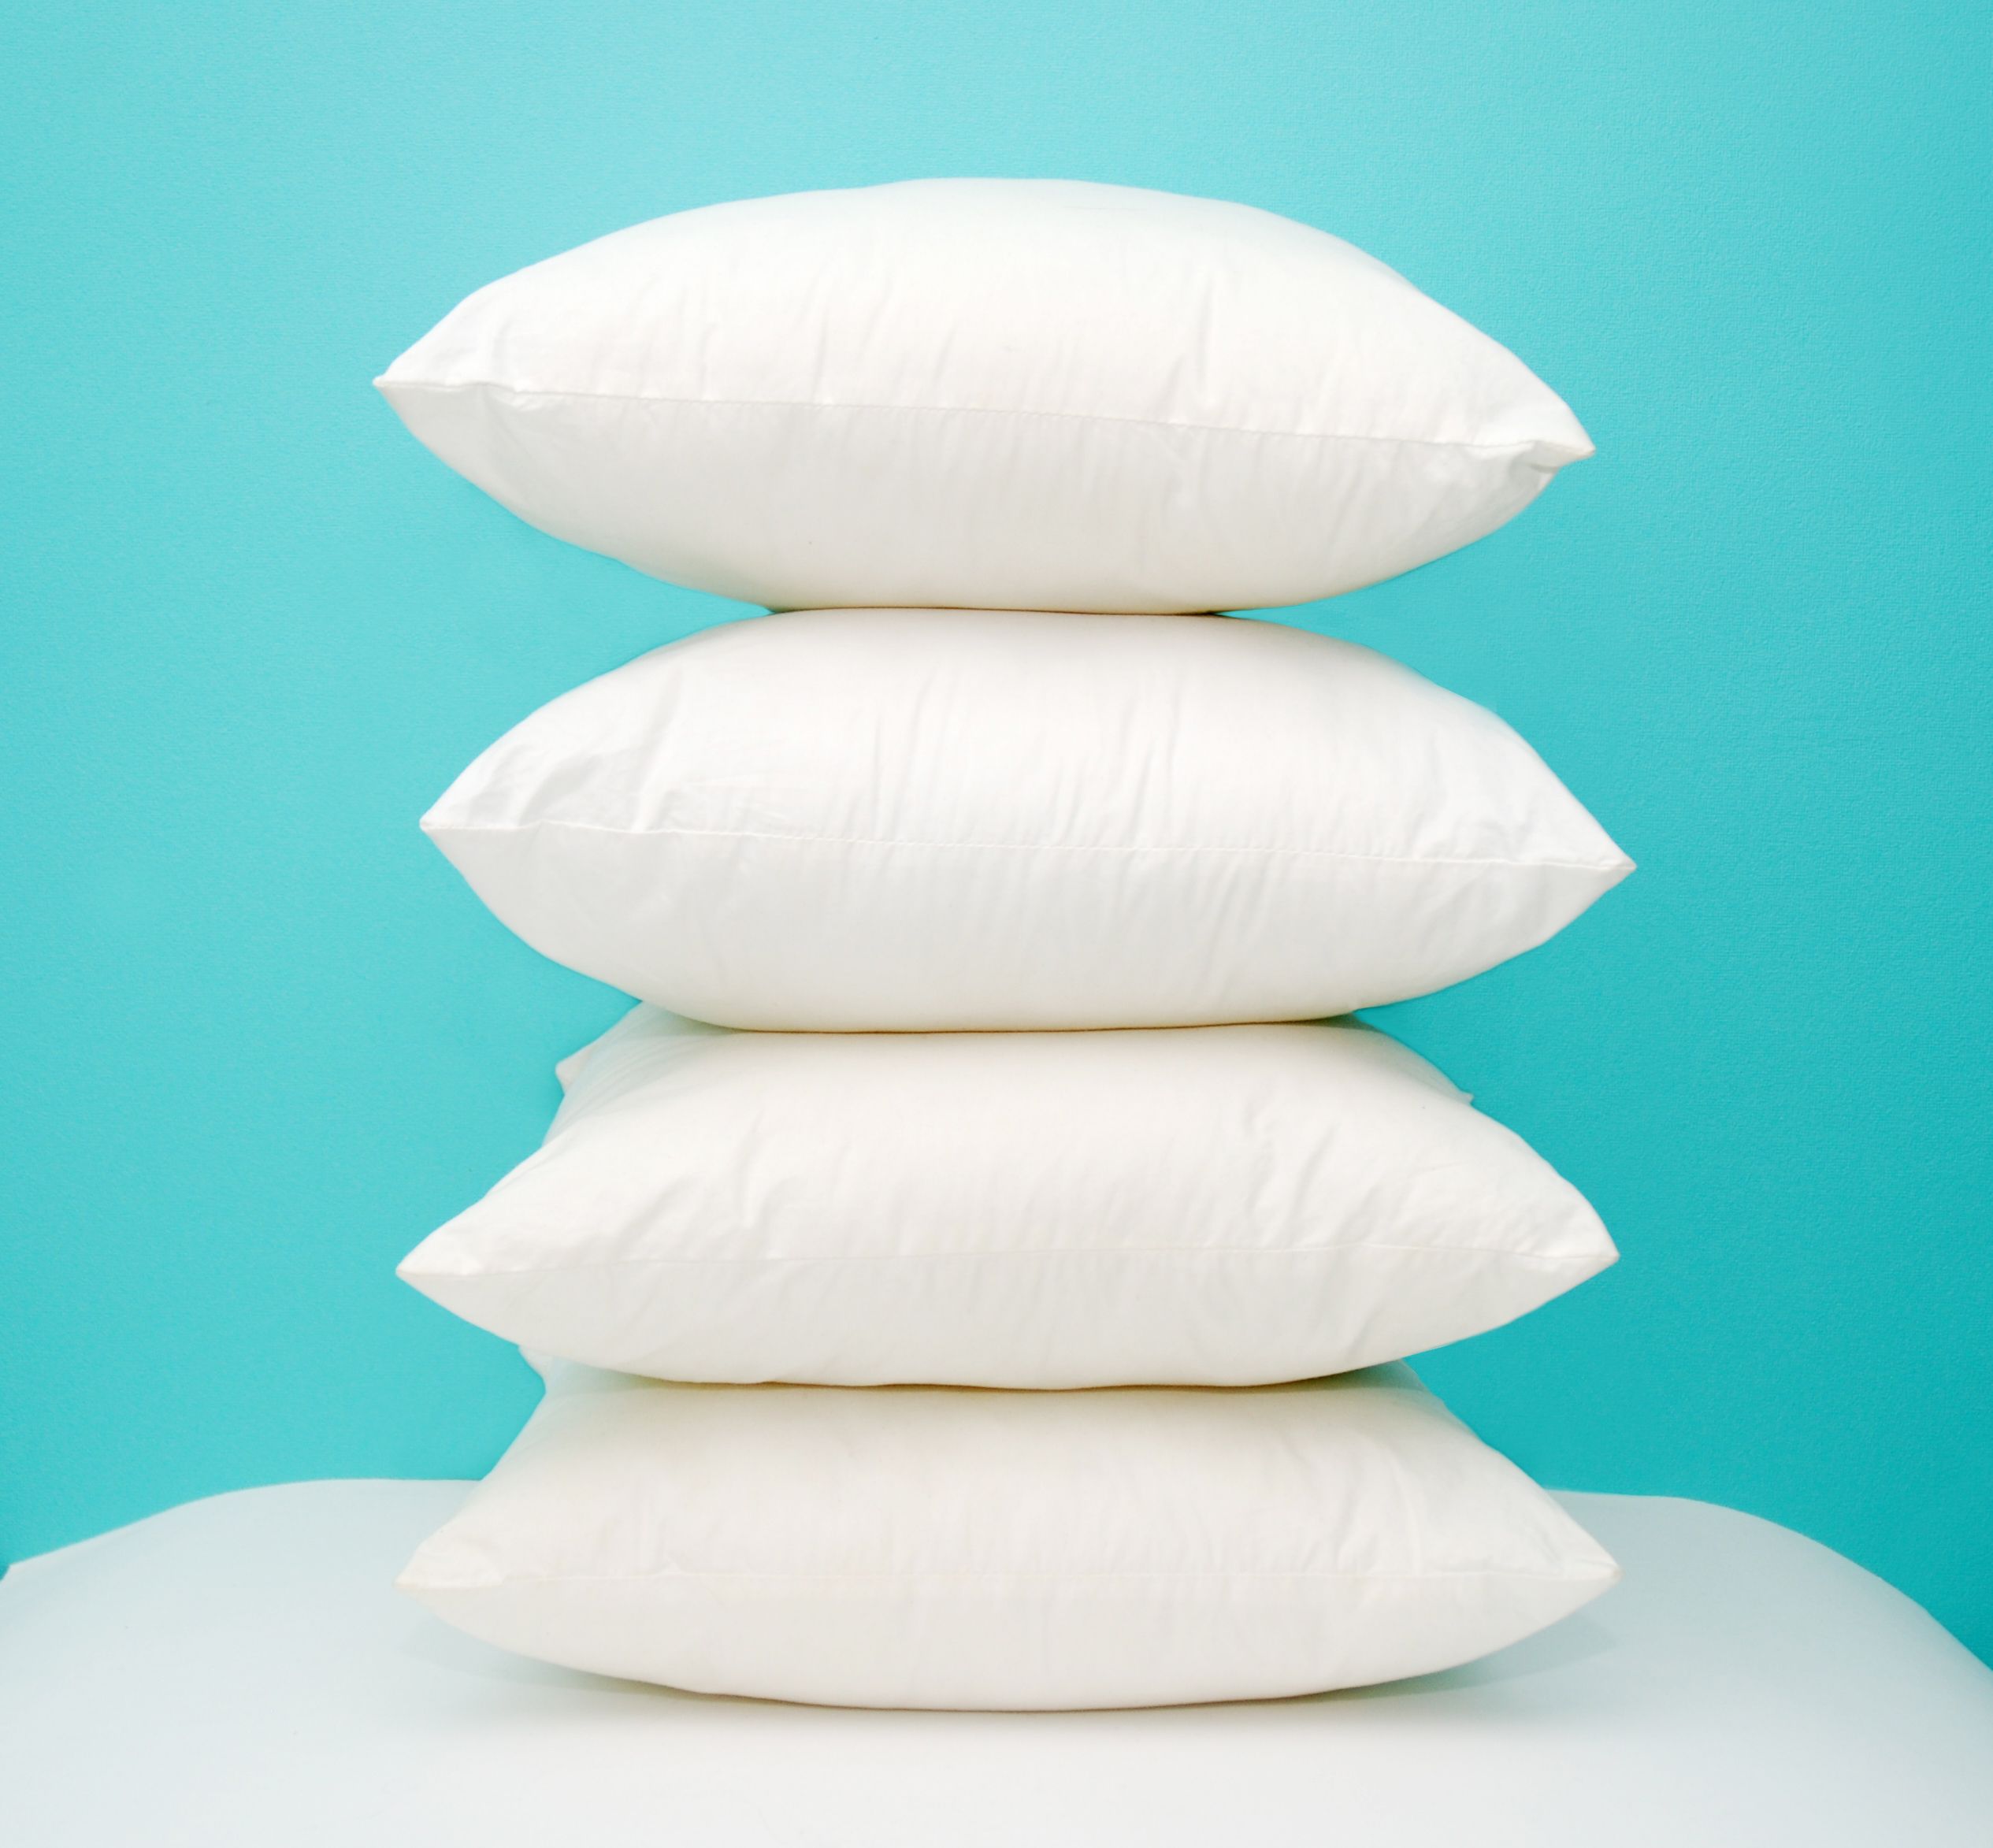 stack of four pillows